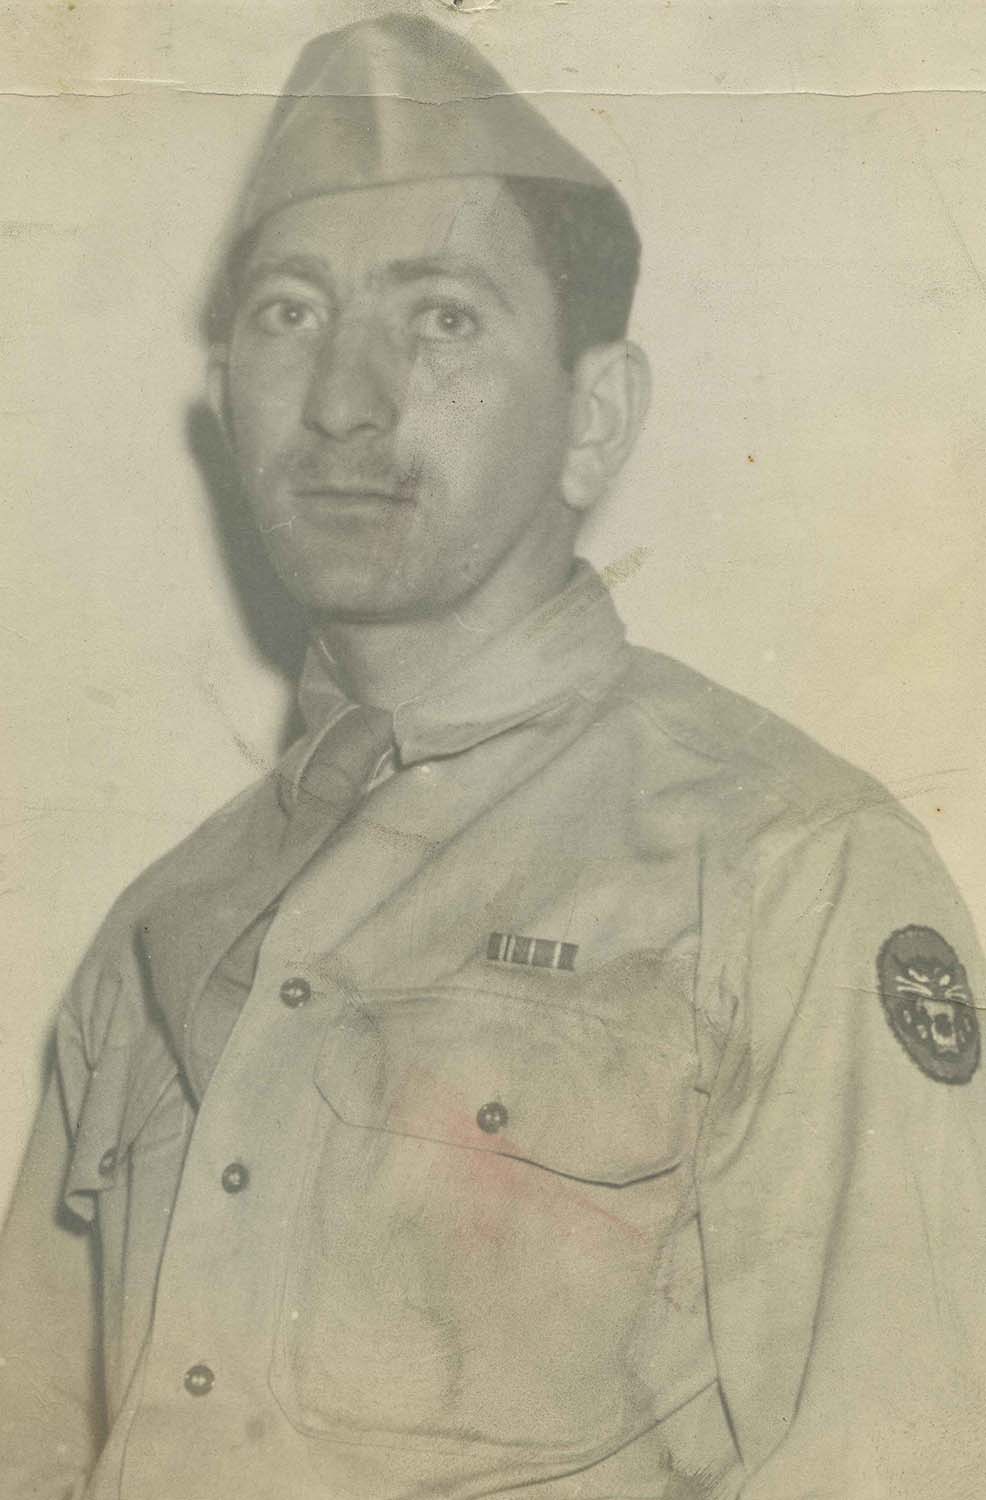 William Barsky in uniform, c. 1944. William Barsky Photographs, Rauh Jewish Archives at the History Center.